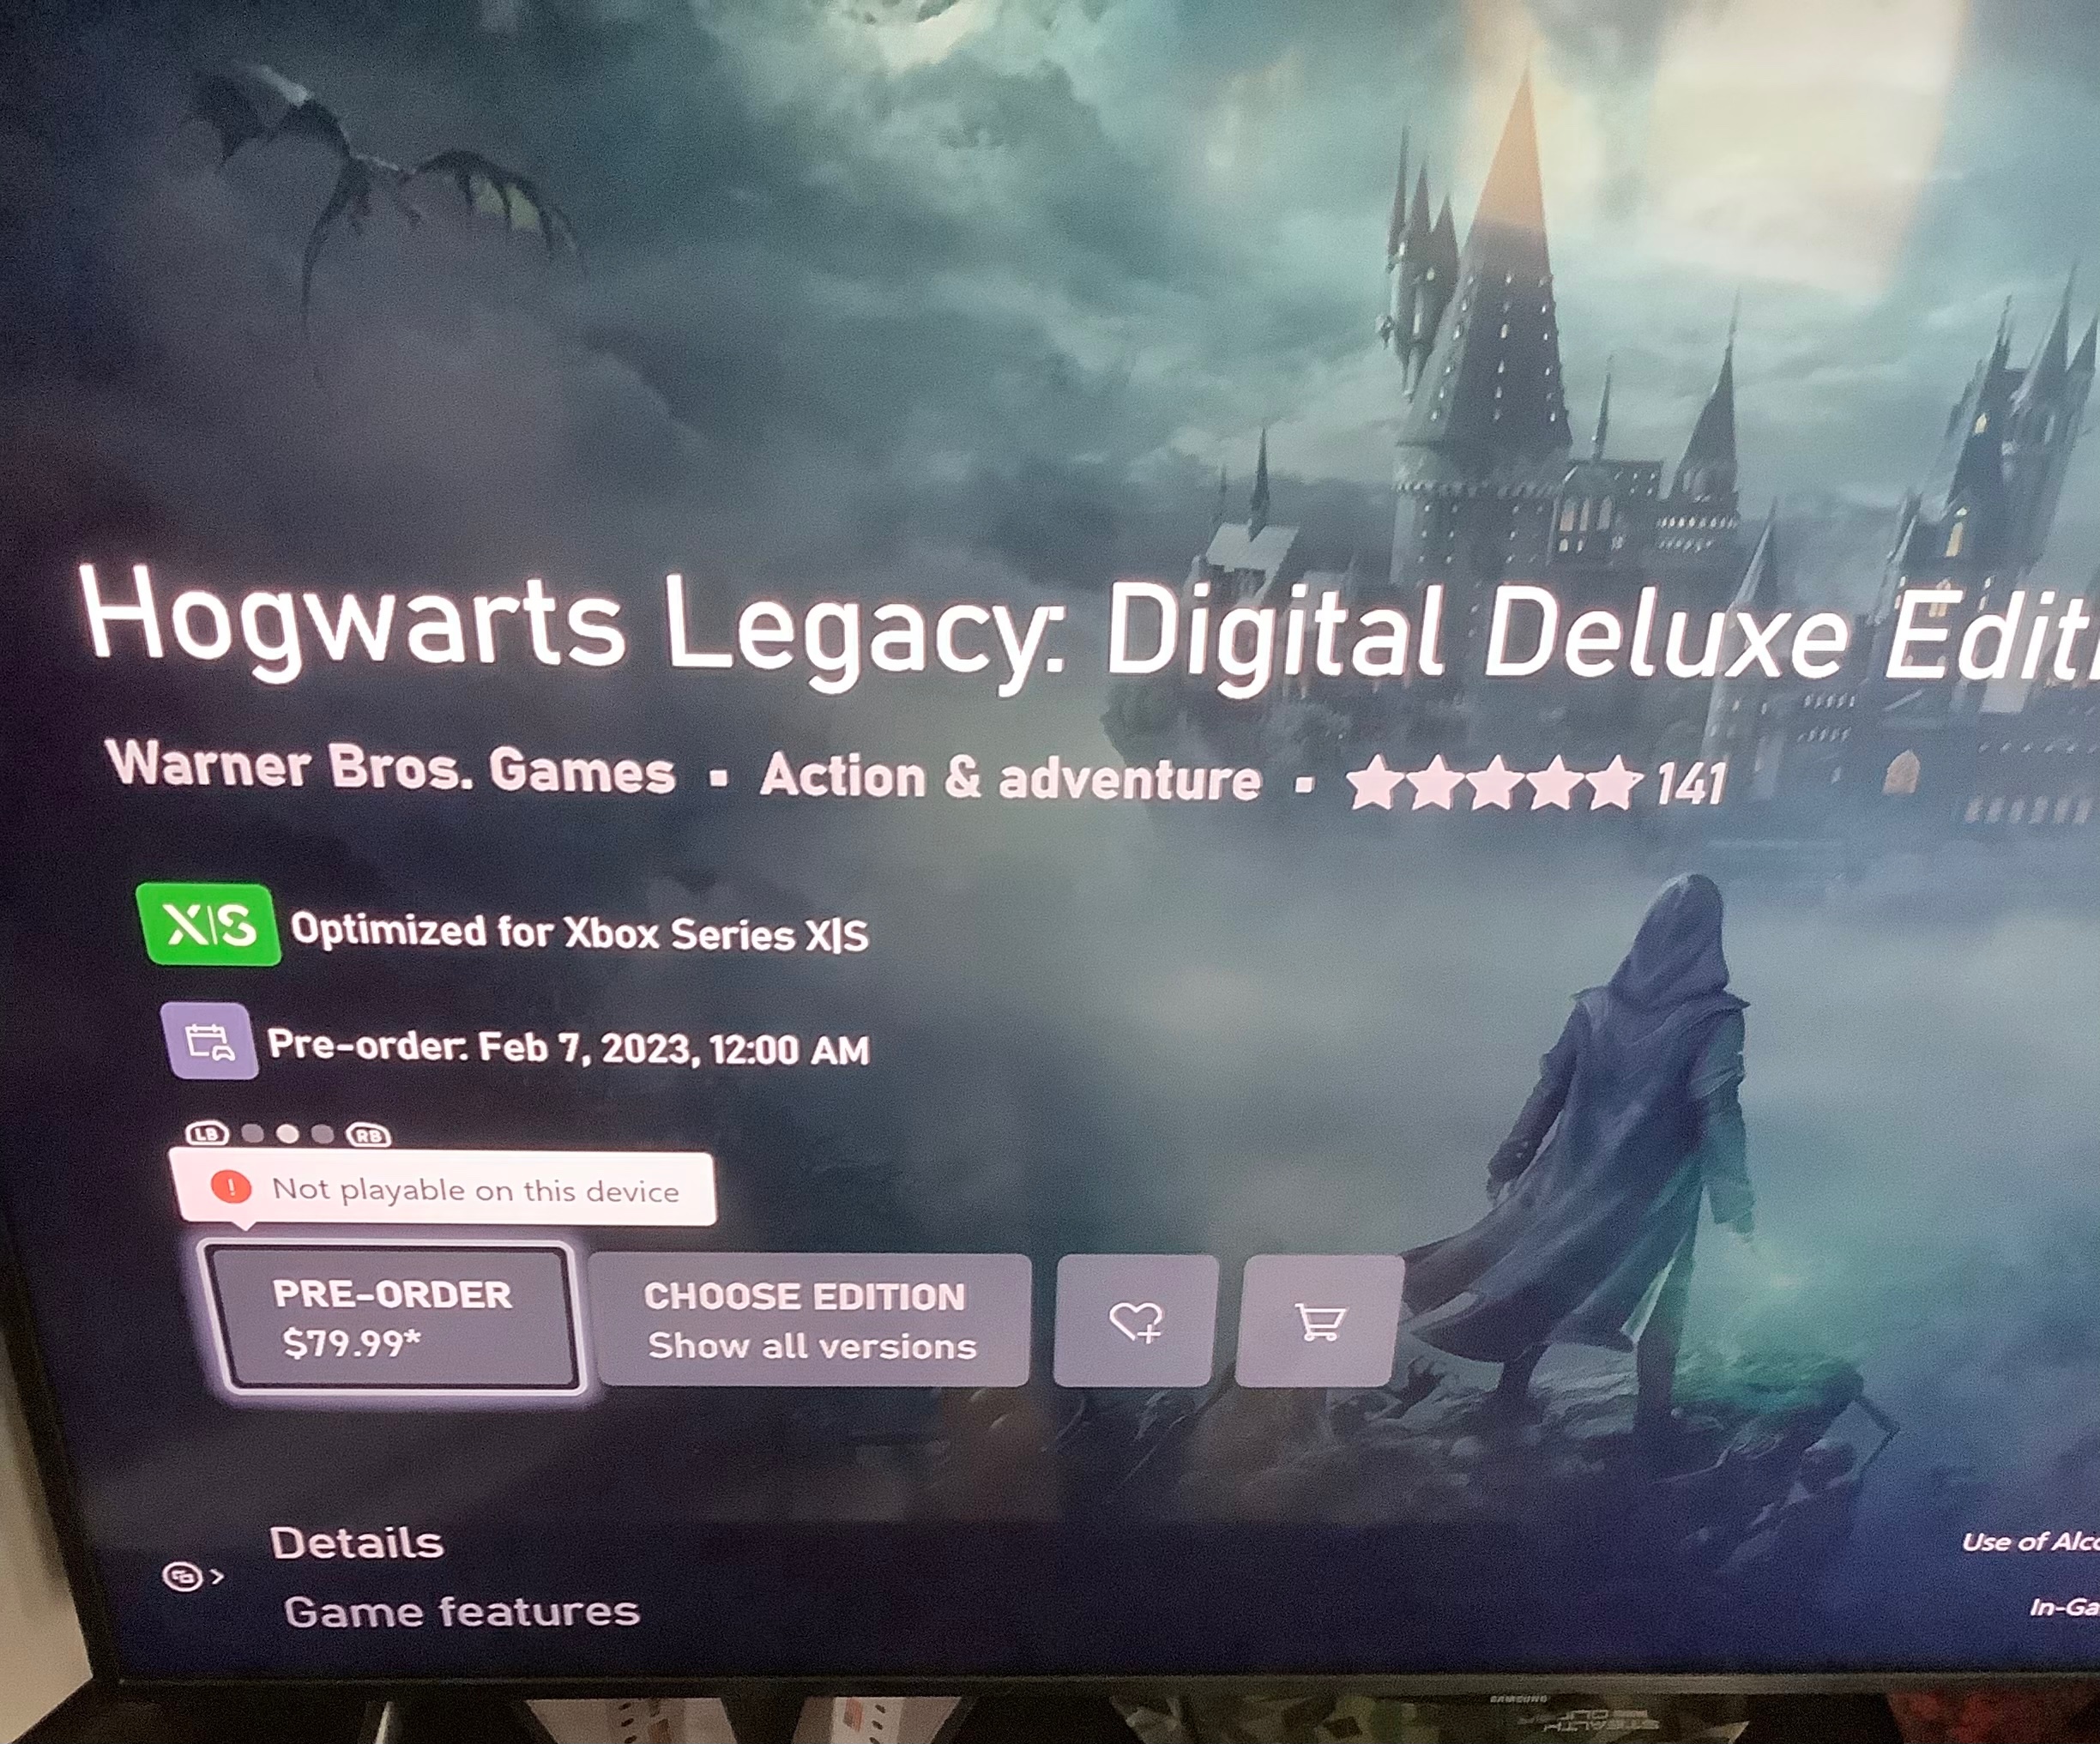 Not playable on device? this Community - Microsoft